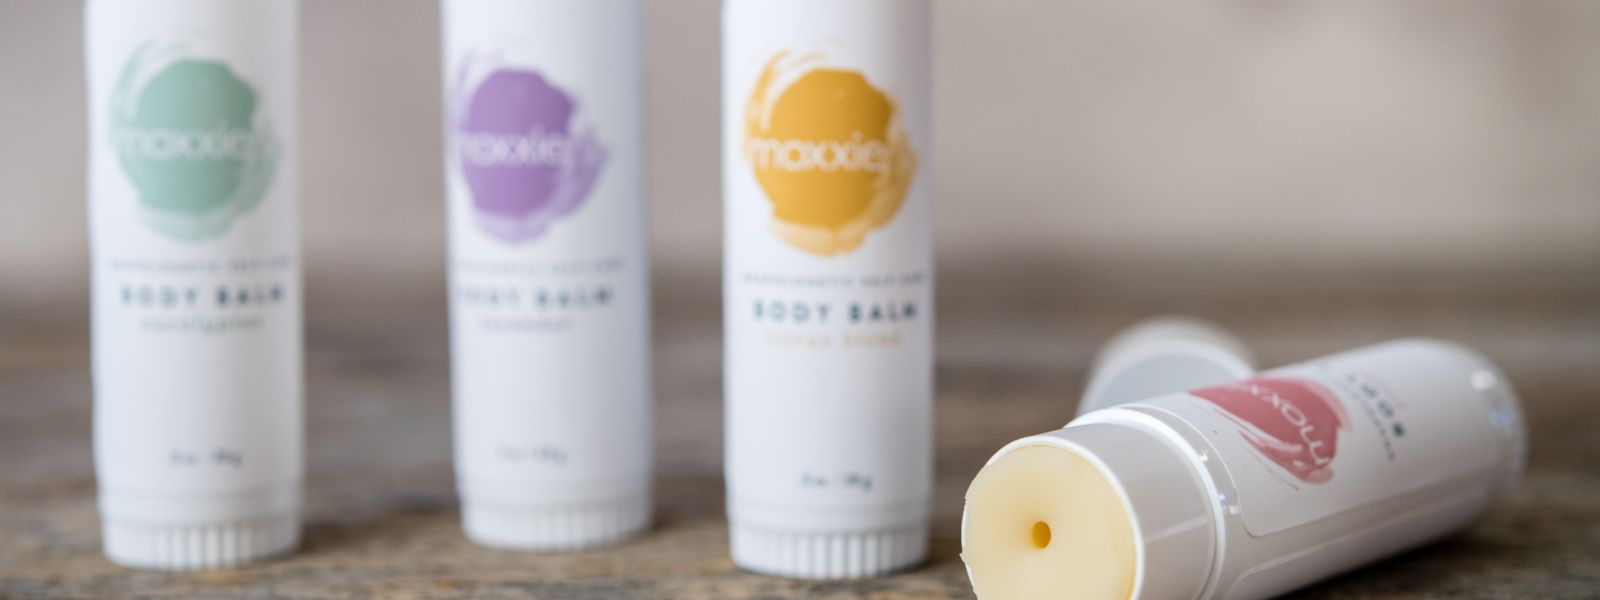 MOXXIE handcrafted, plant-based body balms